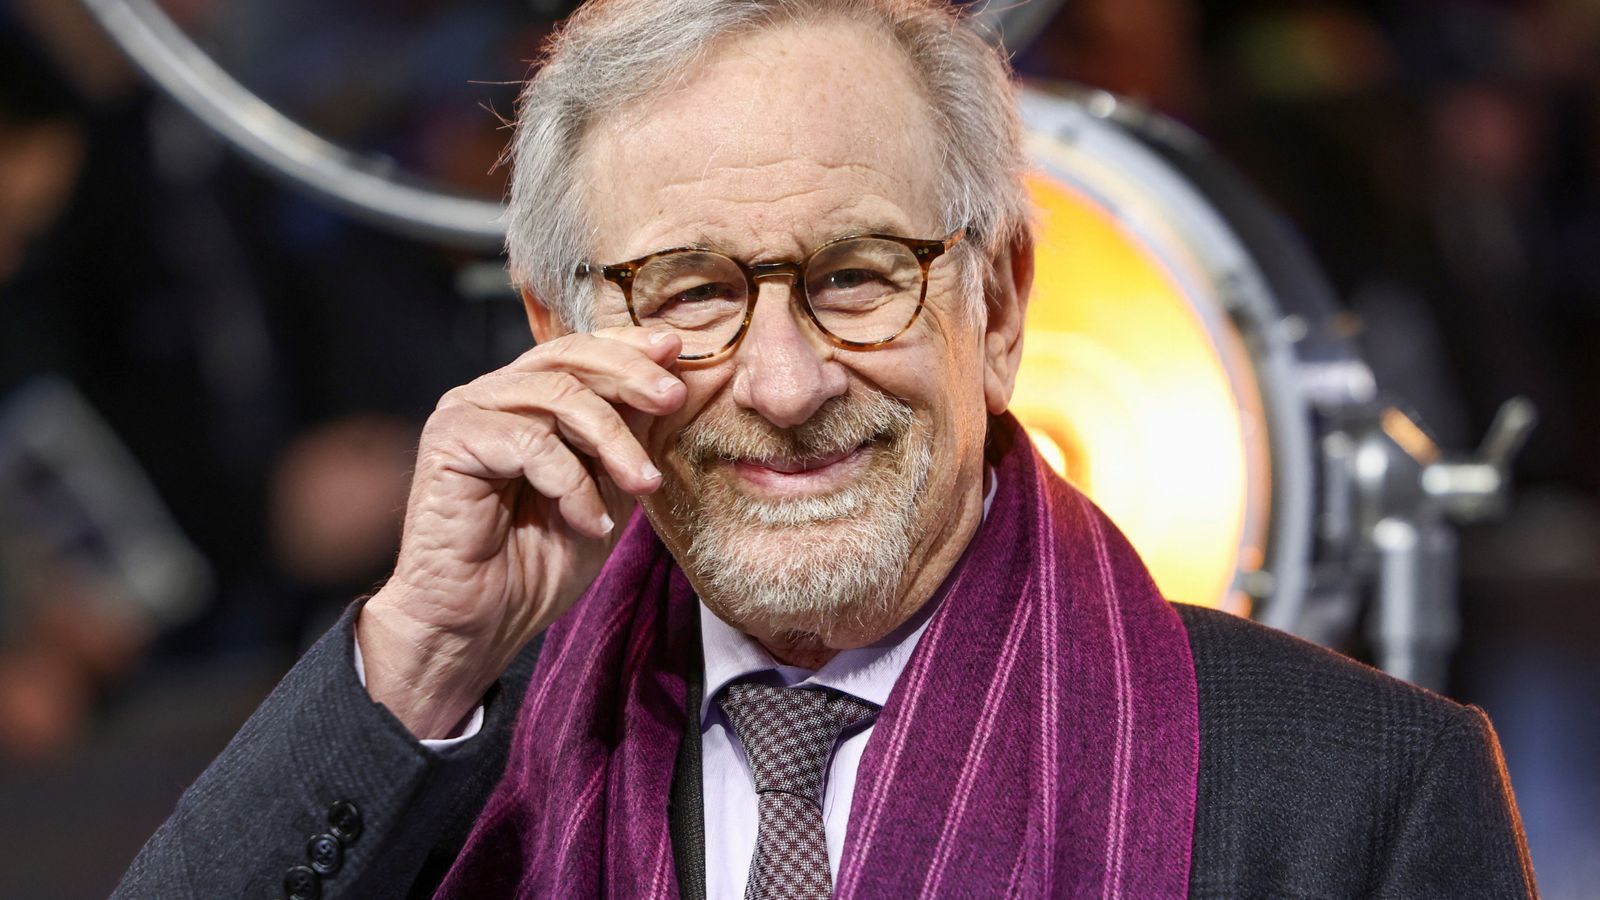 Steven Spielberg says antisemitism 'on the rise' - as new film The Fabelmans shows prejudice he faced as a teen